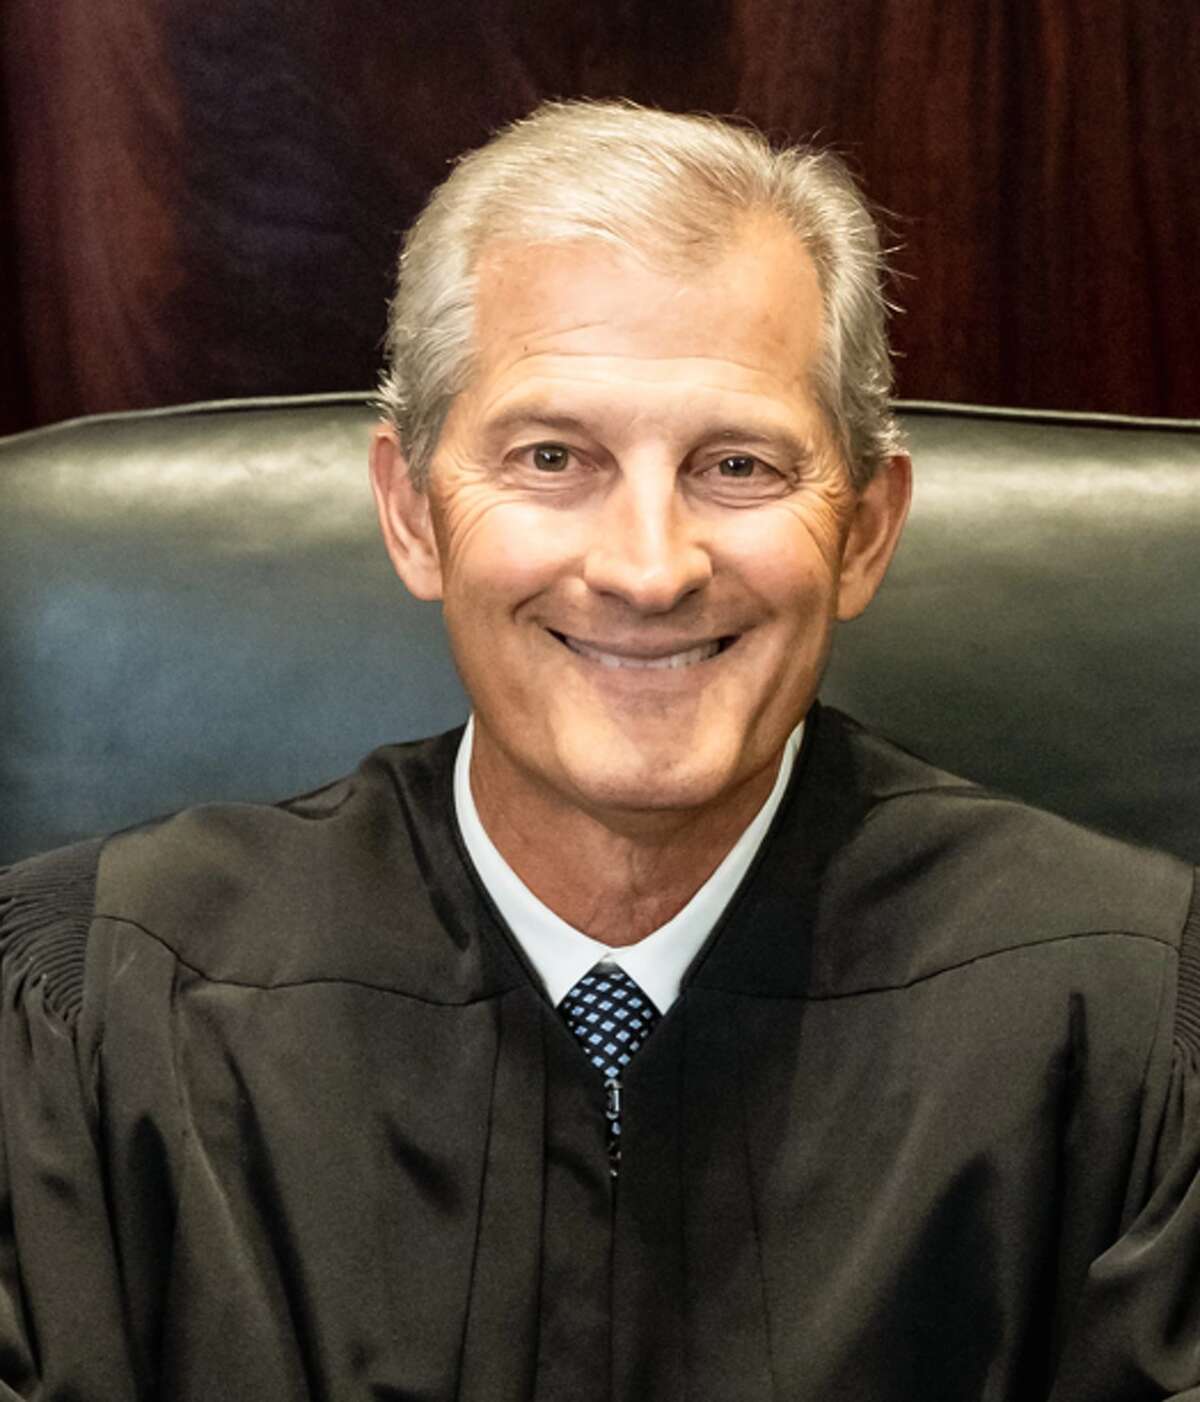 Justice Brian K. Zahra was appointed by Governor Rick Snyder to the Michigan Supreme Court on January 14, 2011. The people of Michigan subsequently elected him in November 2012 to a partial term and then re-elected him in November 2014 to a full term.